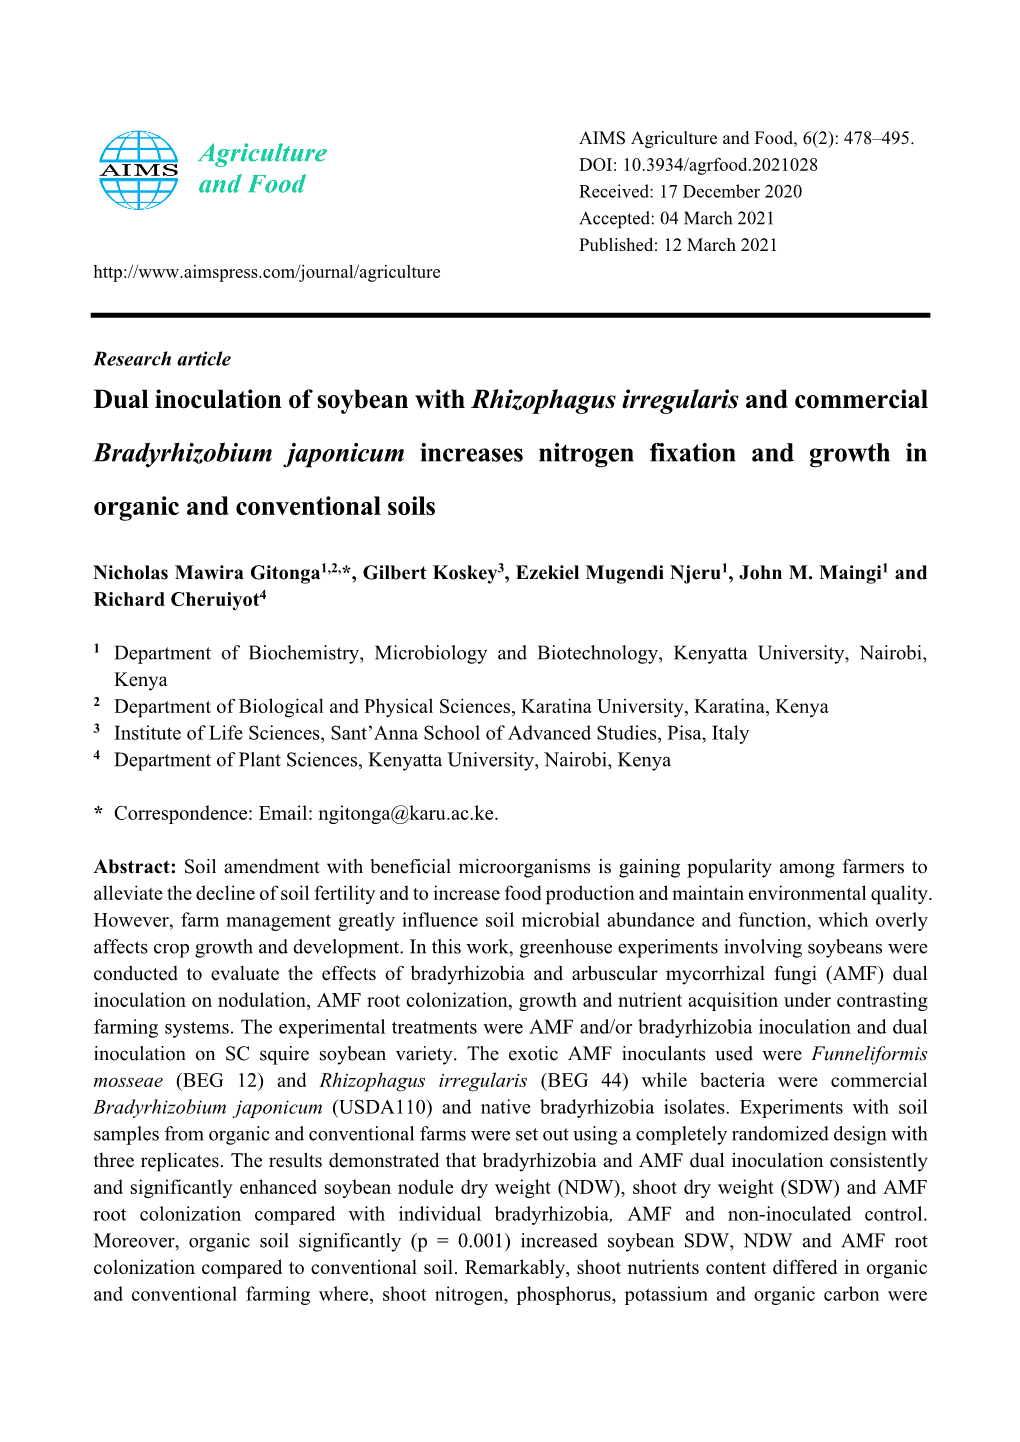 Dual Inoculation of Soybean with Rhizophagus Irregularis And